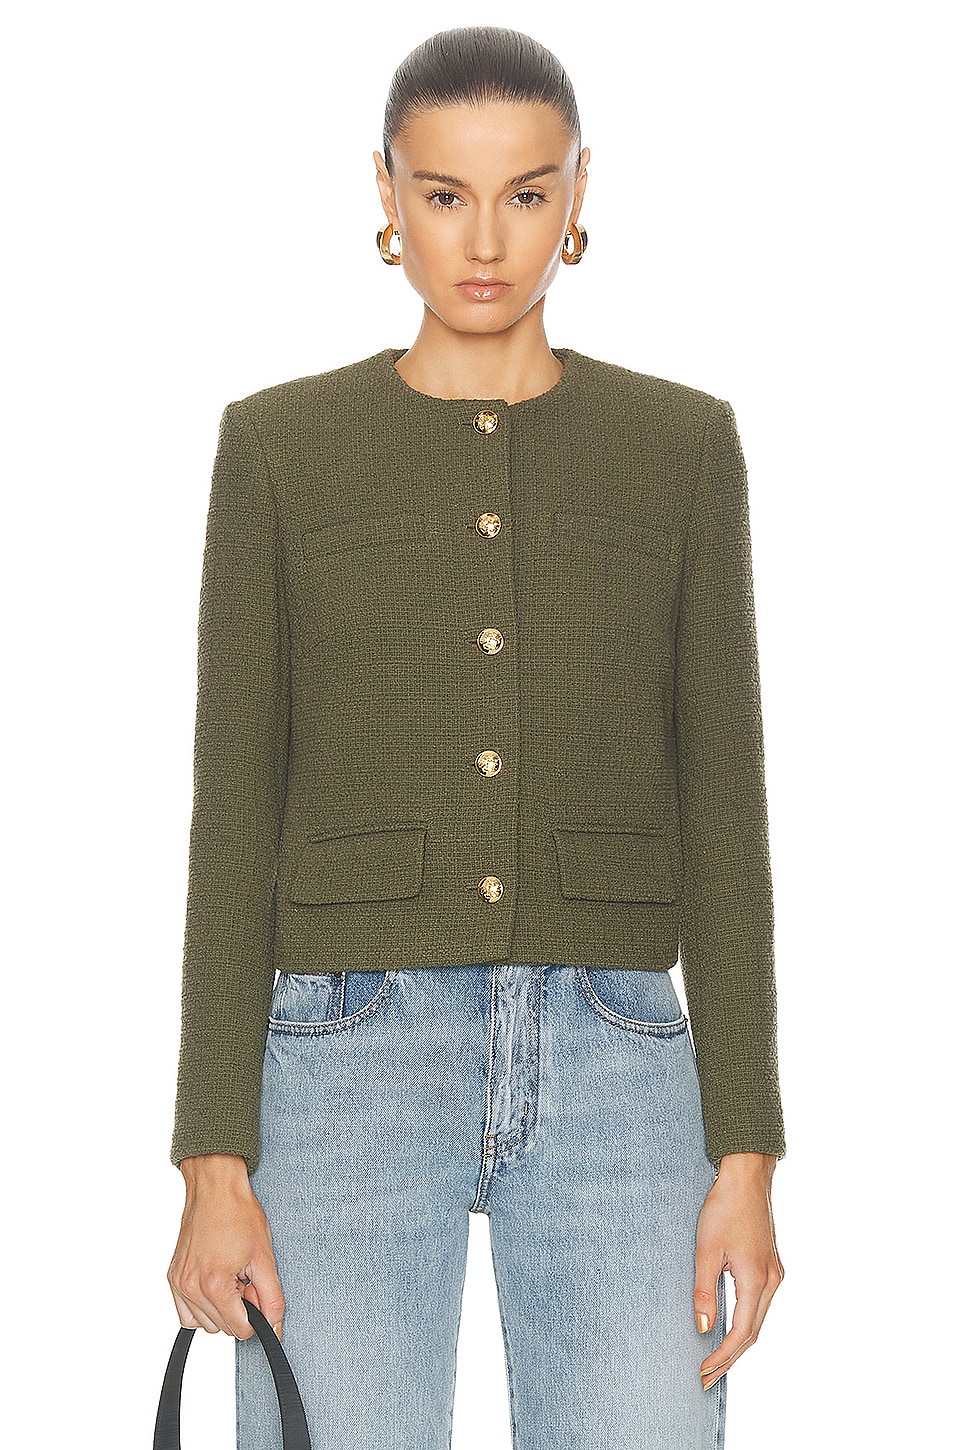 Paiges Jacket in Green